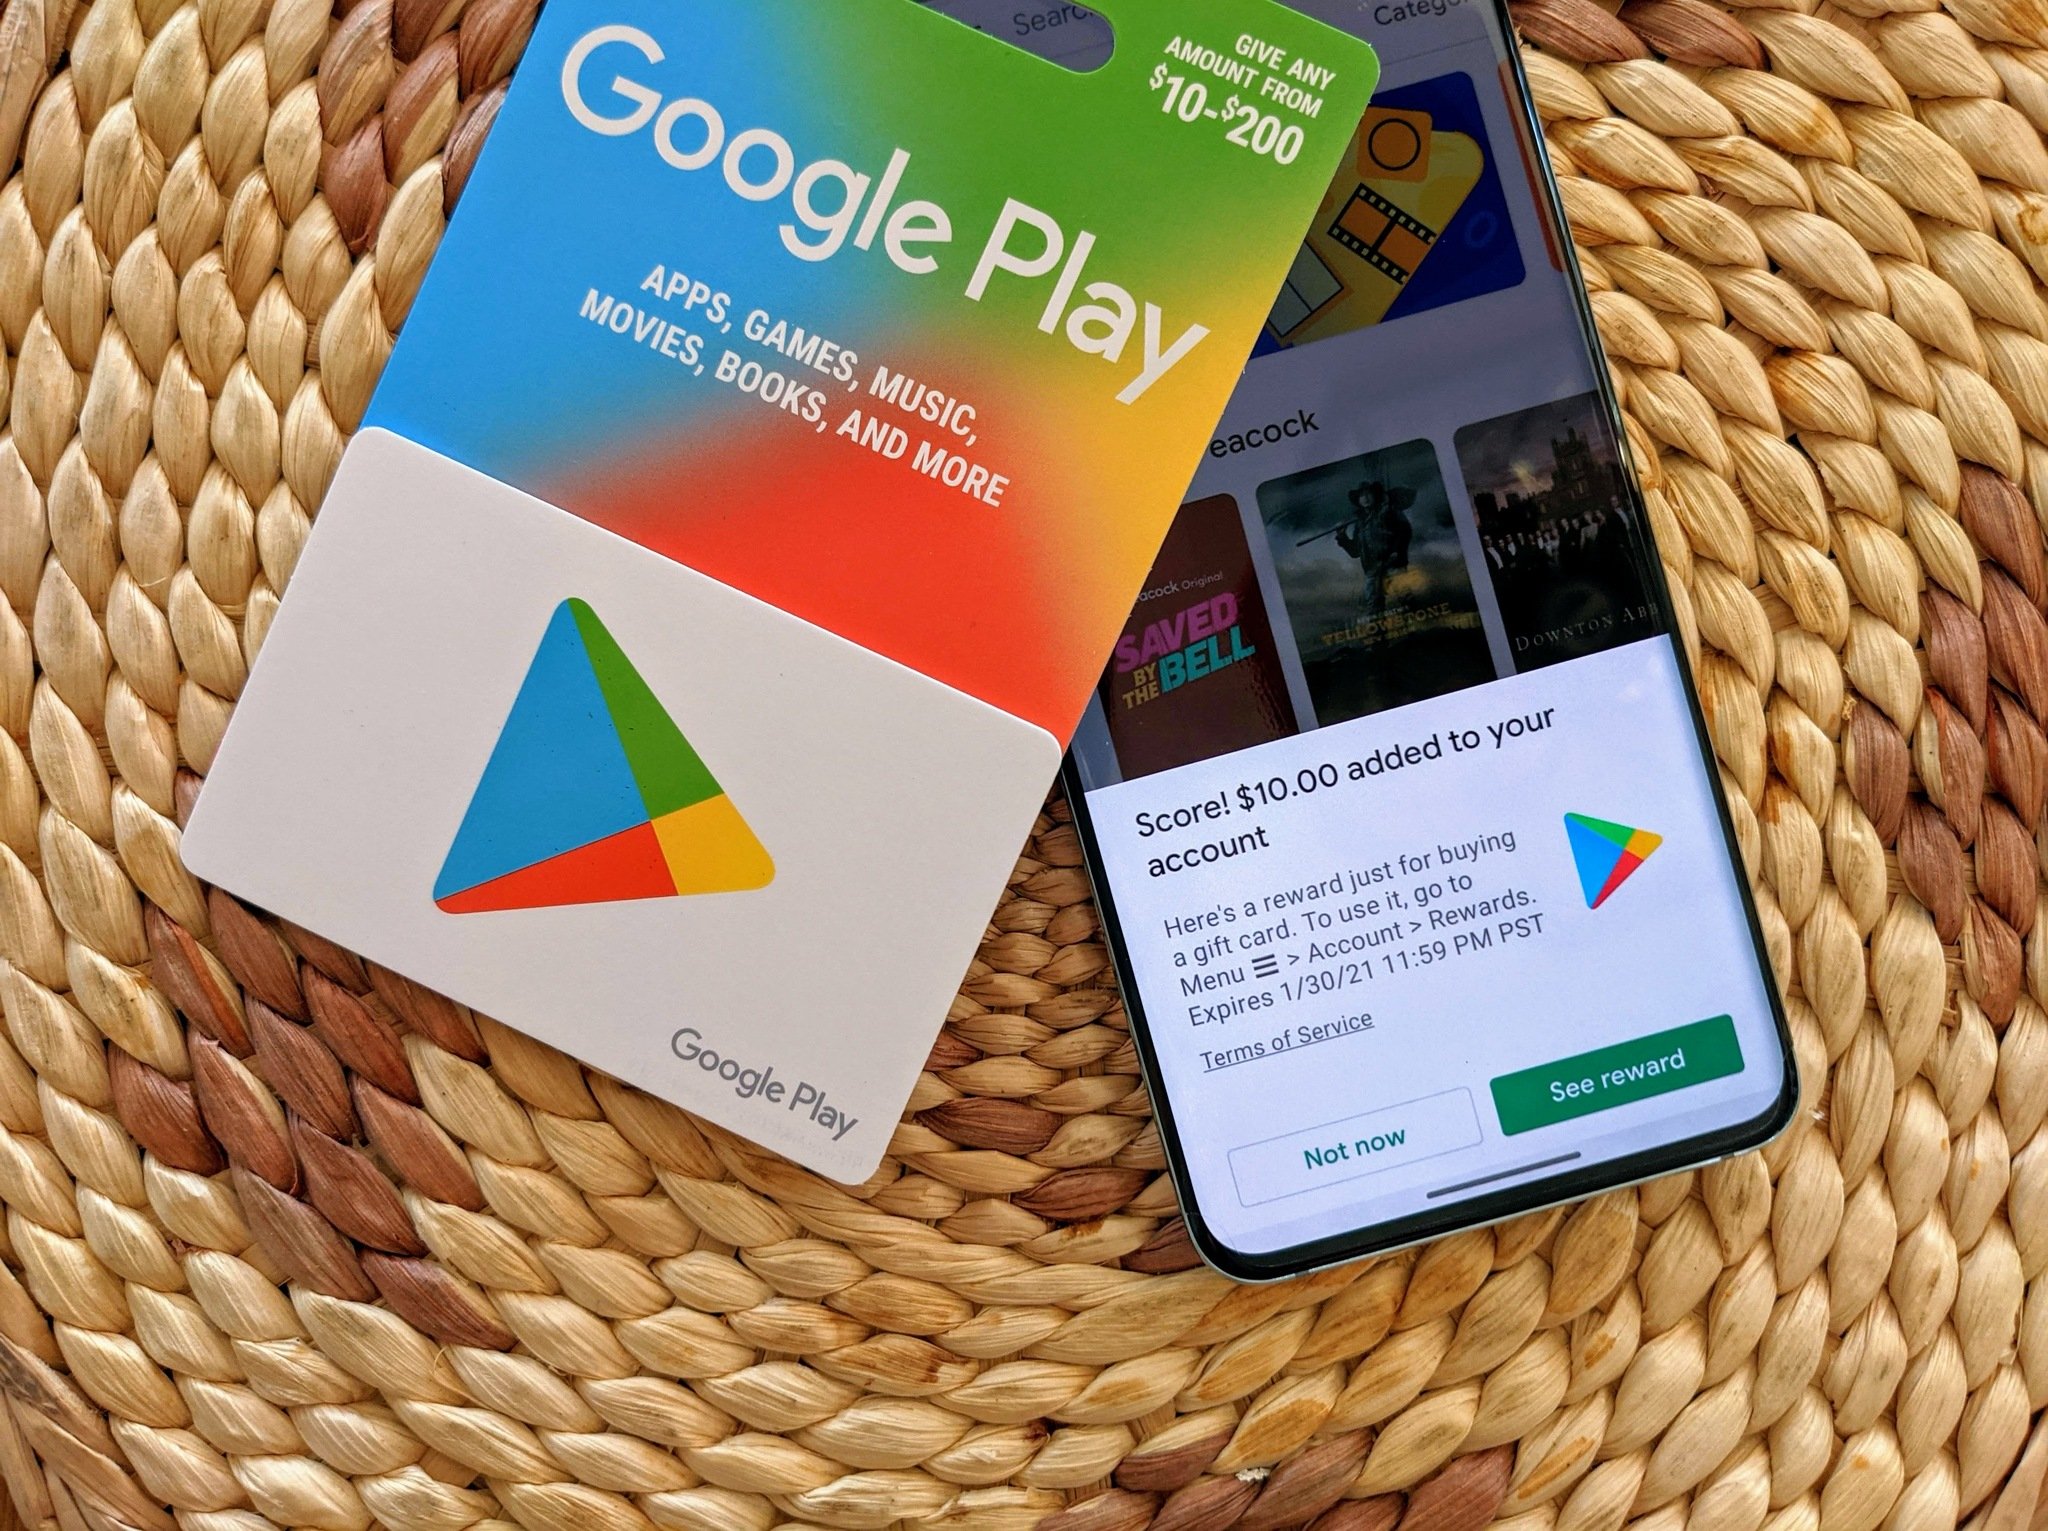 How to Gift Google Play Gift Card?